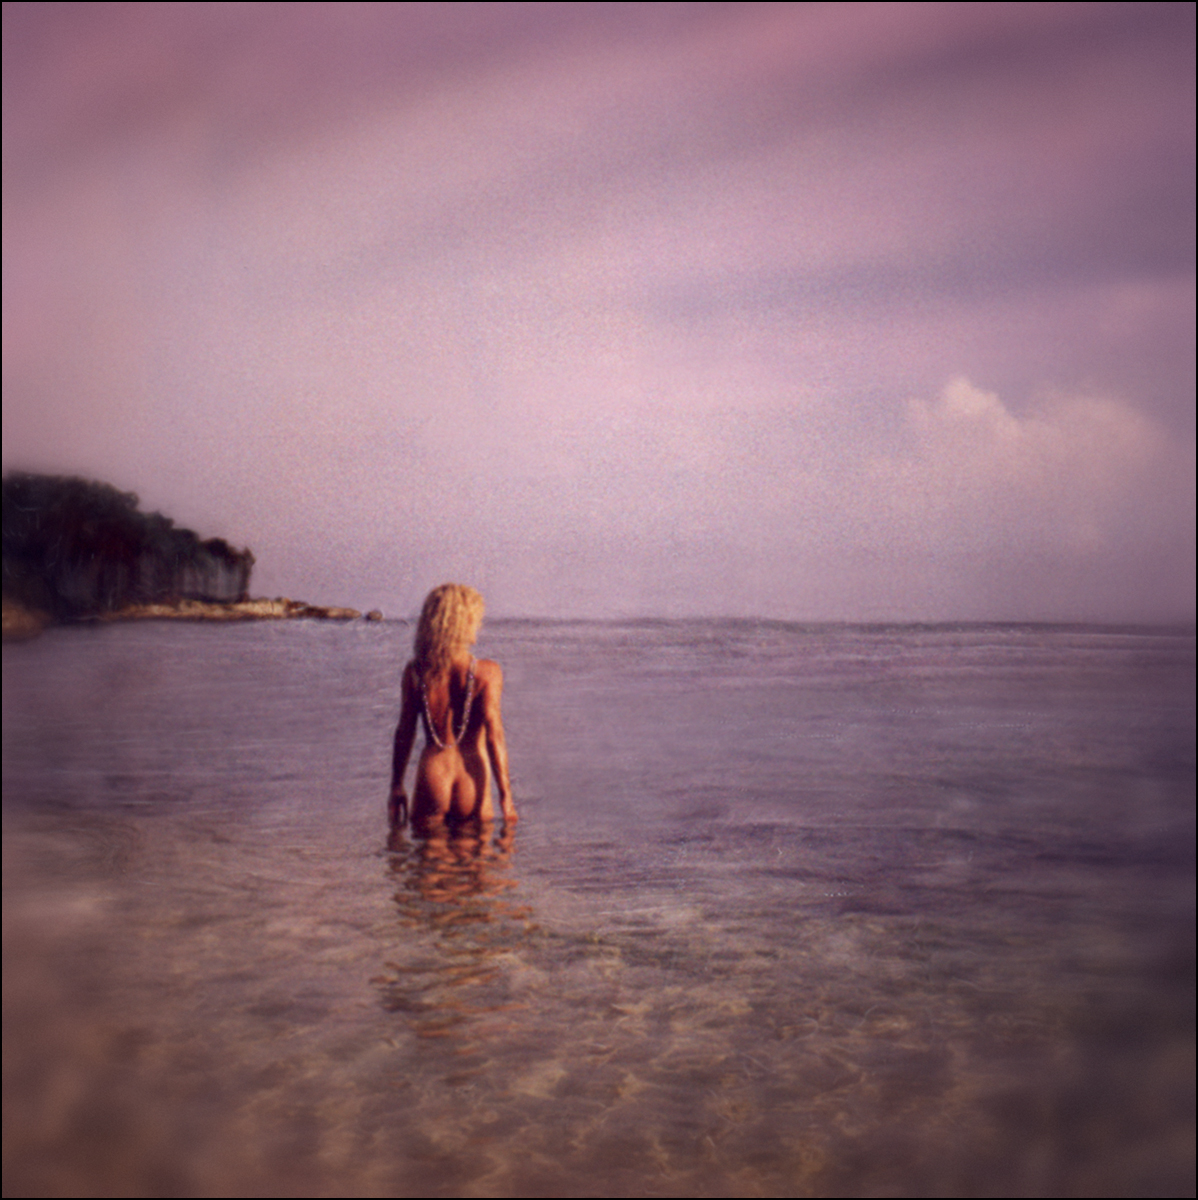 "Skinny Dipping" <br> Nude in Water, Negril, Jamaica